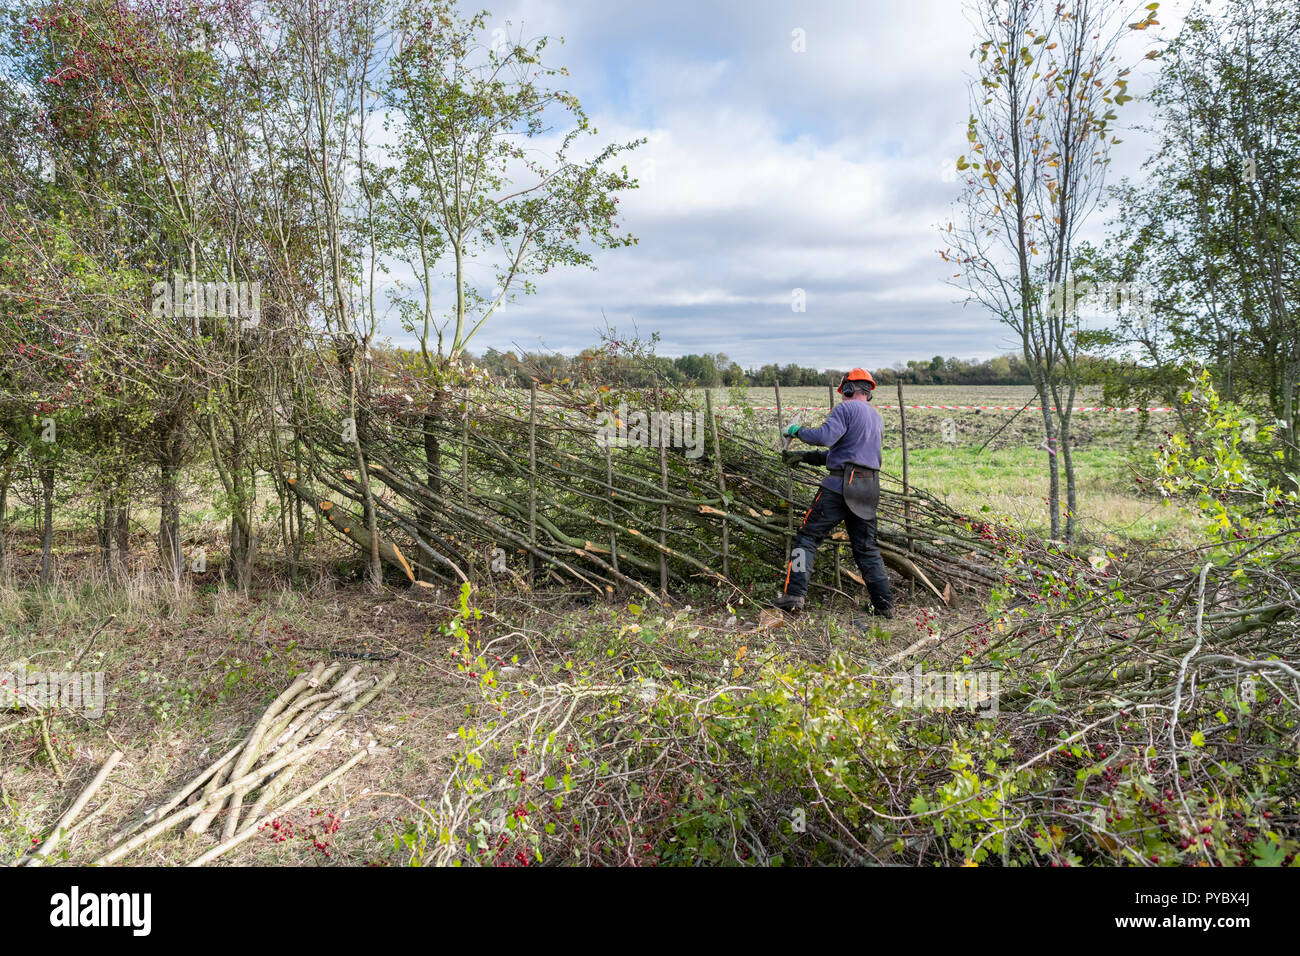 Barton, Cambridgeshire UK 27th October 2018.  Competitors take part in the 40th National Hedgelaying Championships. Around 100 entrants came from all over the UK to cut and lay a hedge in various traditional regional styles - a traditional way to manage and maintain hedgerows. Credit: Julian Eales/Alamy Live News Stock Photo